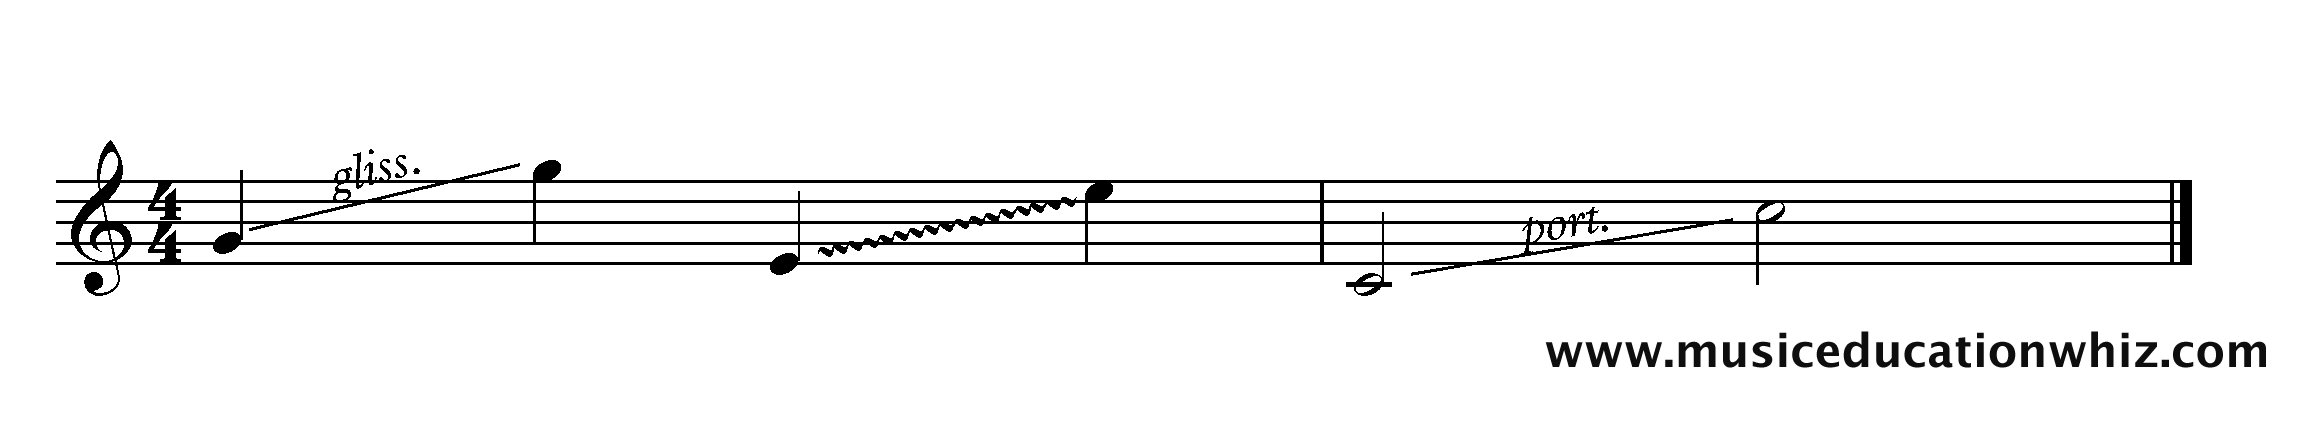 wiggly diagonal lines between a low note and a high note, with or without bliss. or port. written above